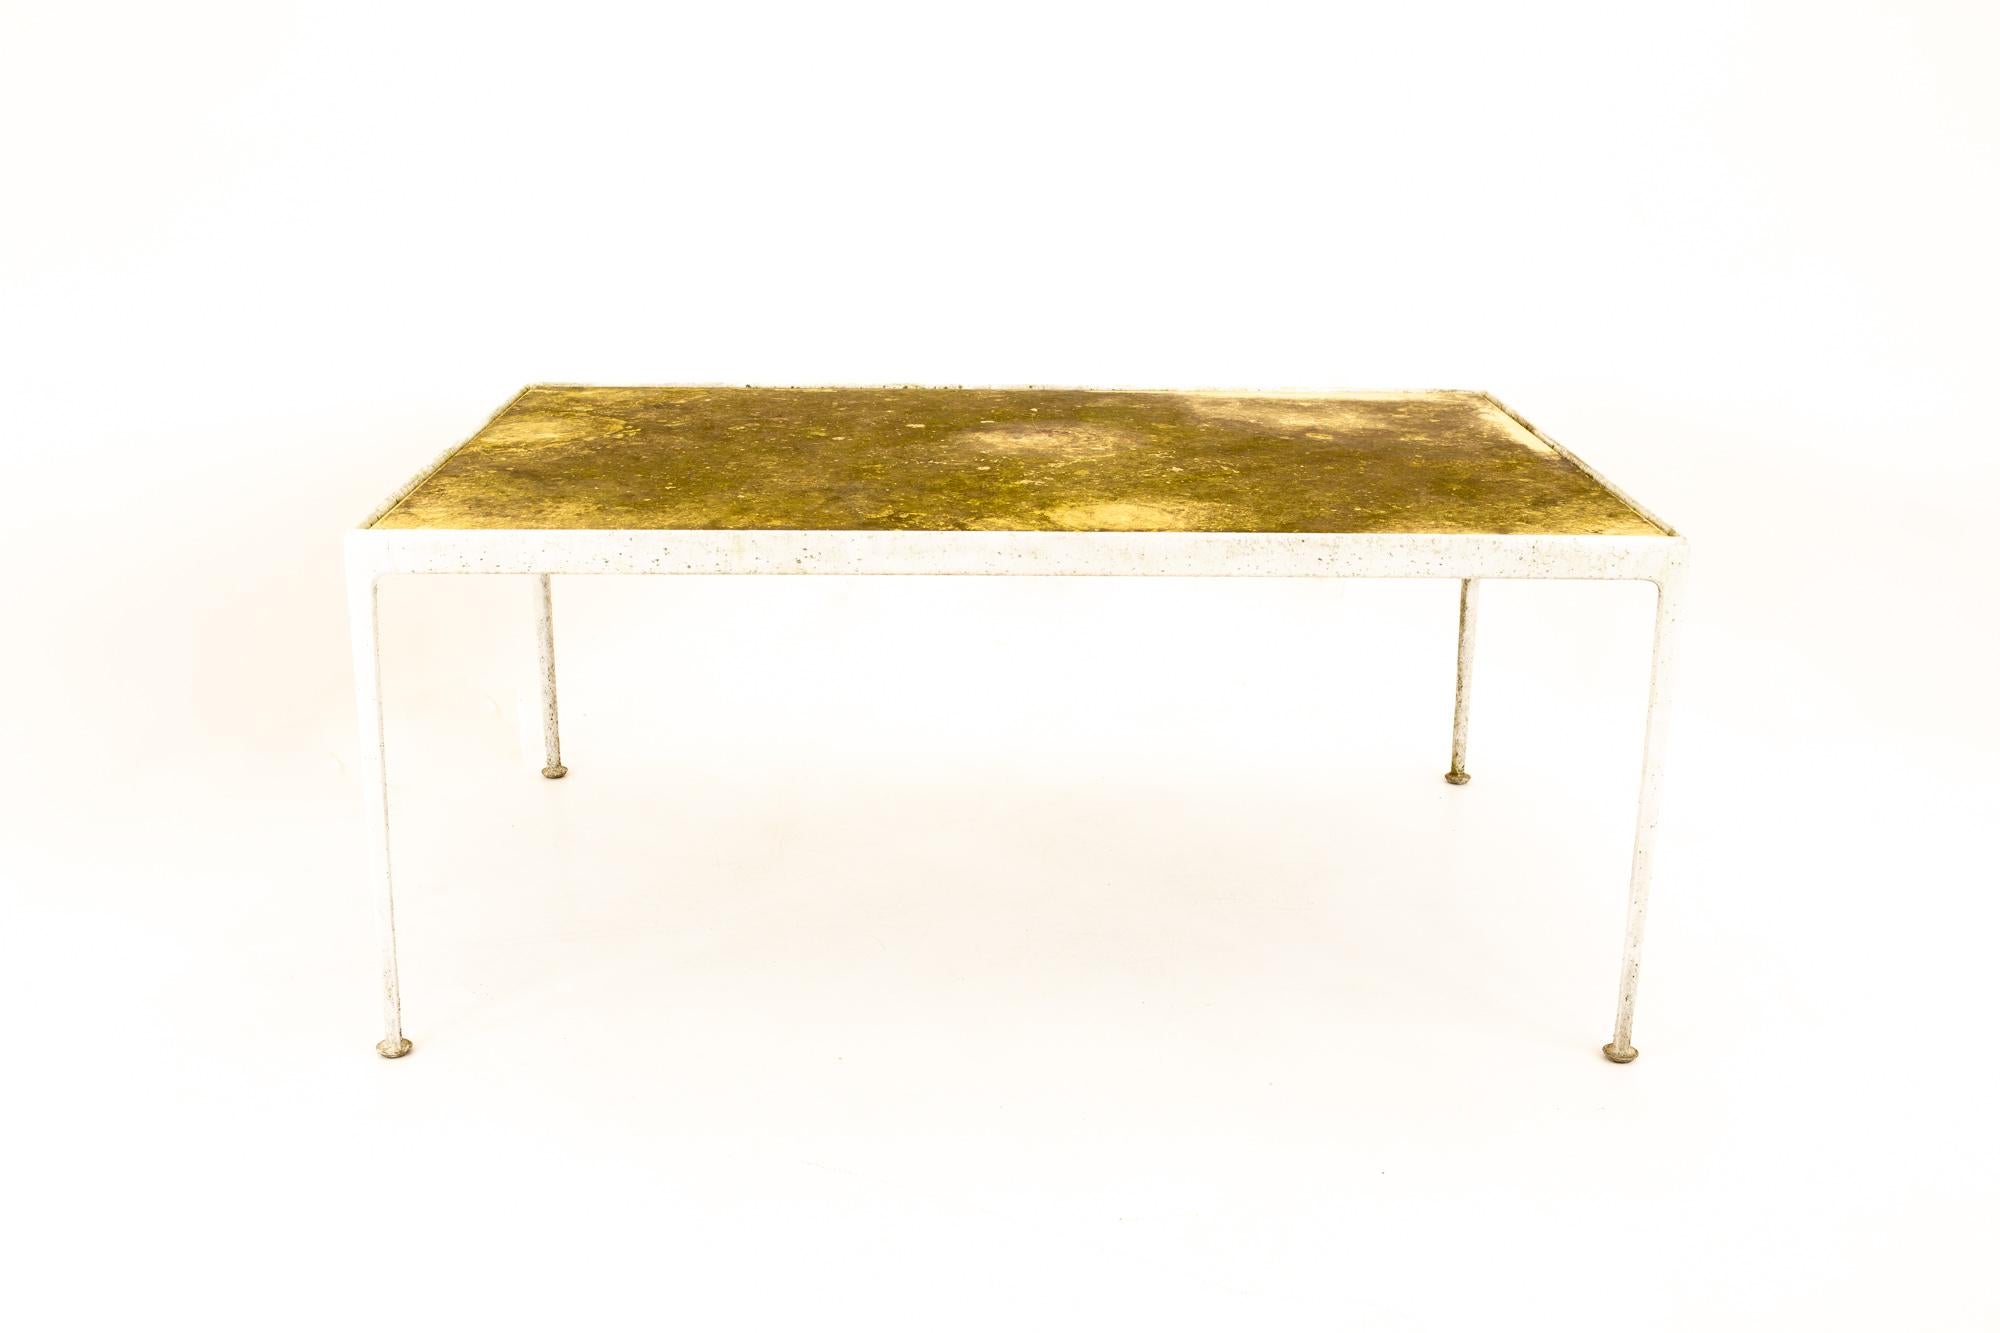 Richard Schultz for Knoll Mid Century gold top dining table
Table measures: 60 wide x 38 deep x 26.25

Table and top can be finished to any color

All pieces of furniture can be had in what we call restored vintage condition. That means the piece is